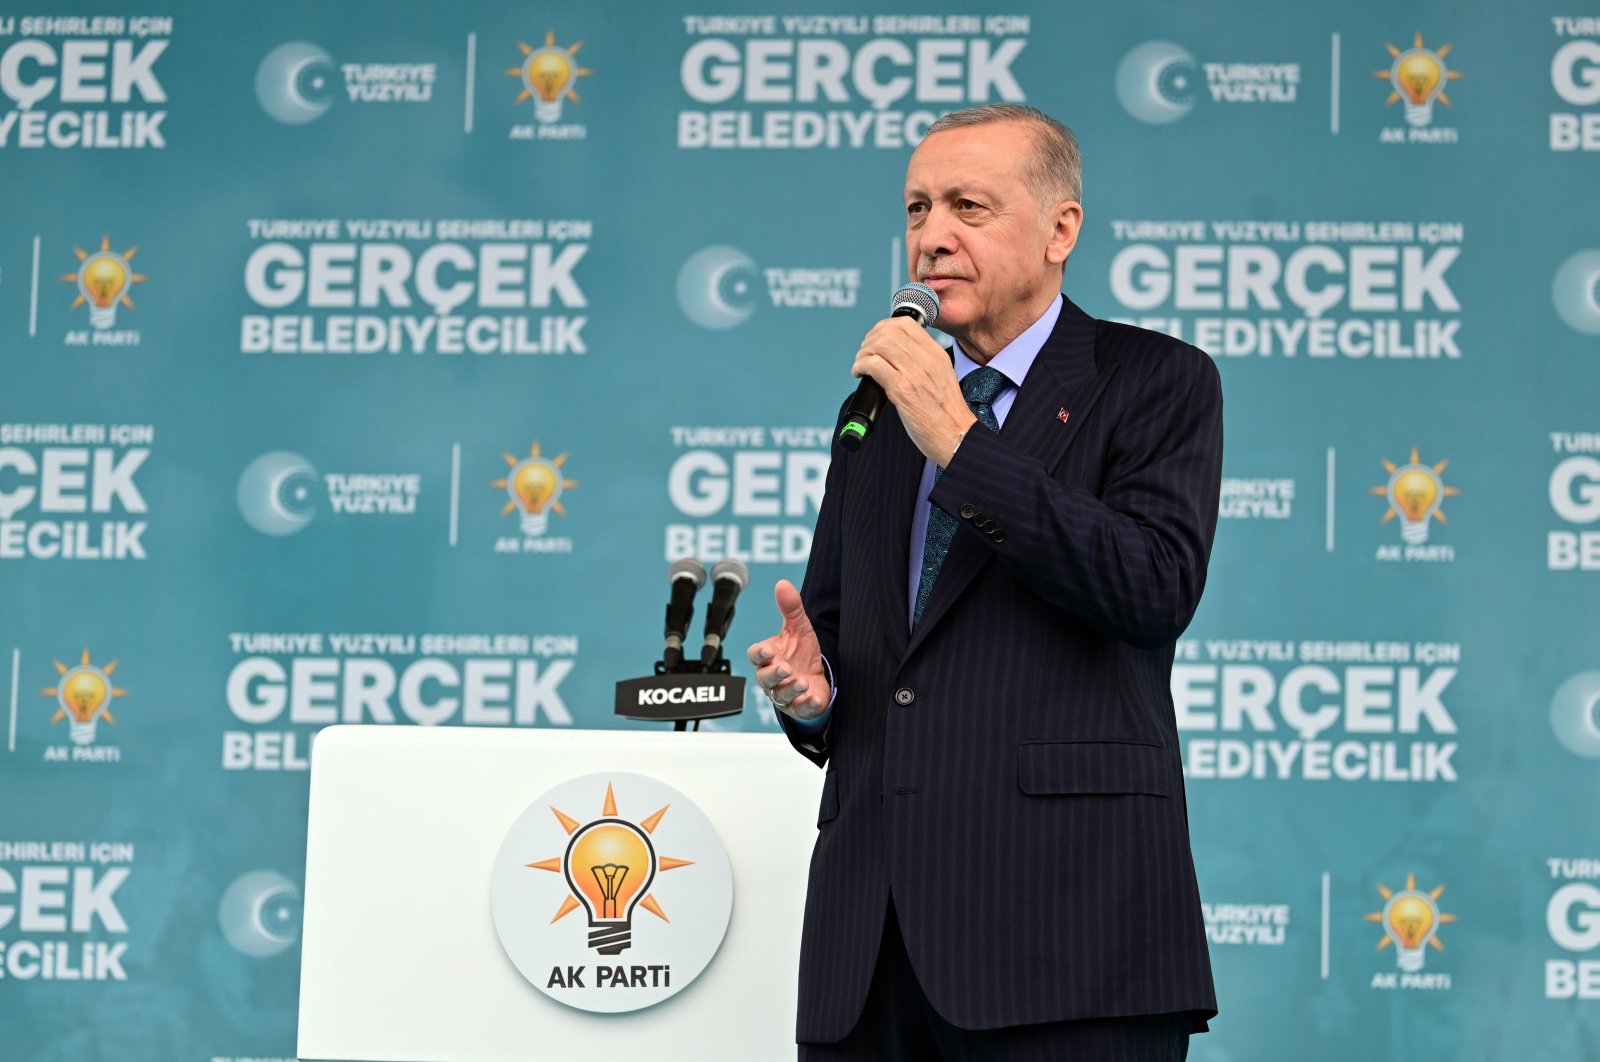 President Erdoğan urges citizens to head to ballot on March 31